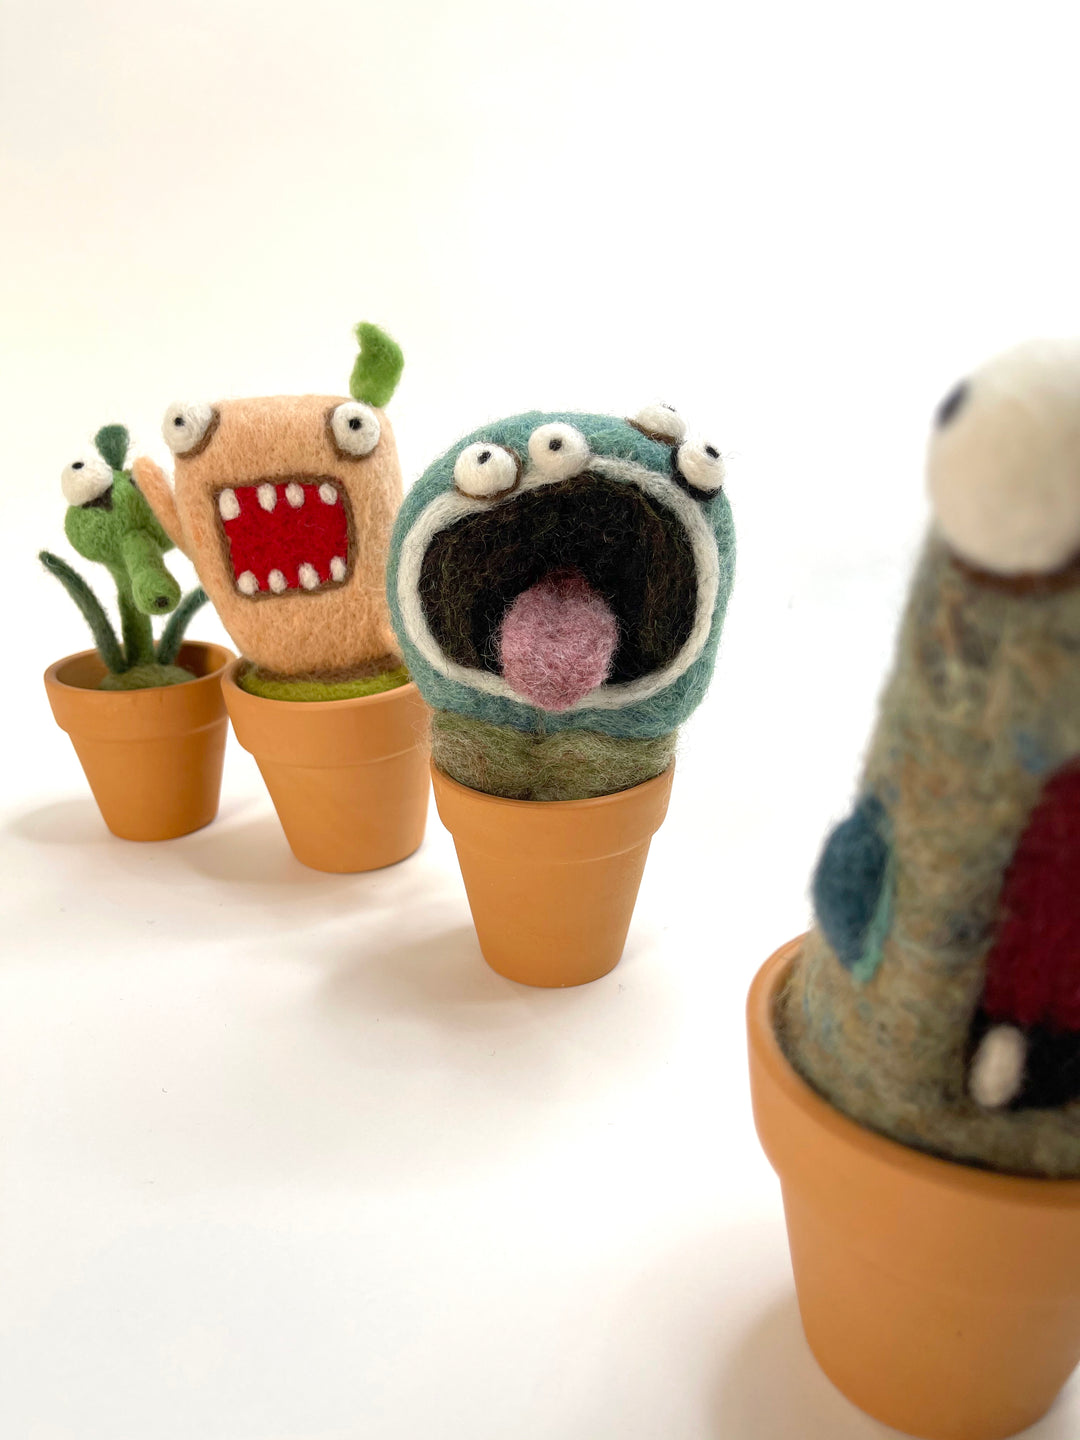 Tom Monster Plant with Clay Pot